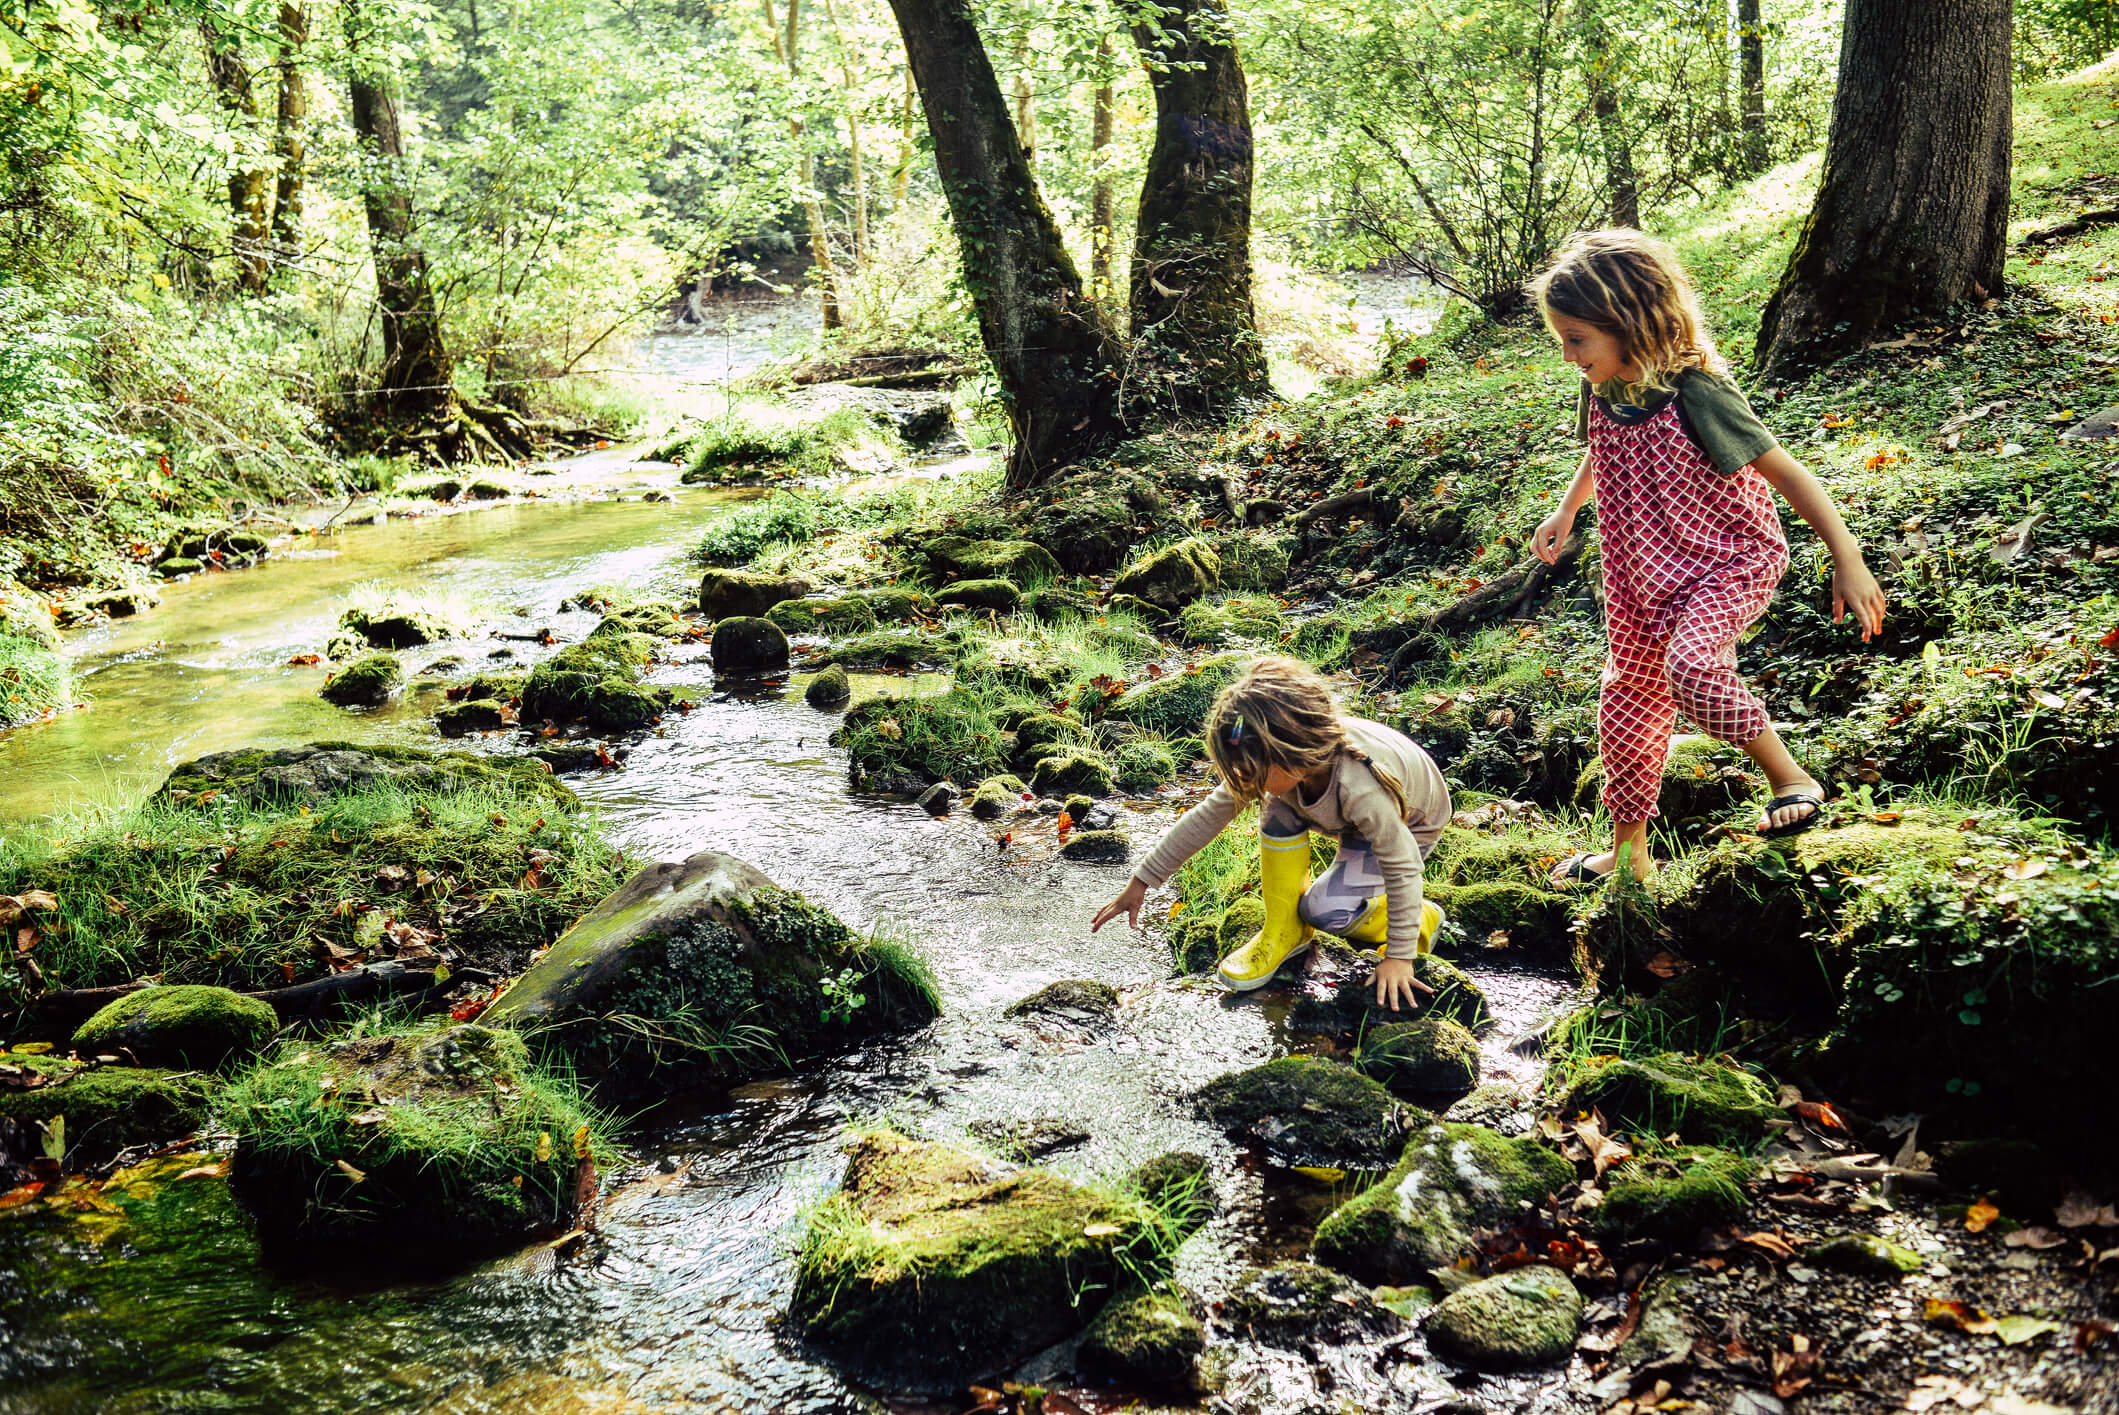 Two children having an adventure, climbing and stepping in a river exploring a beautiful natural area.